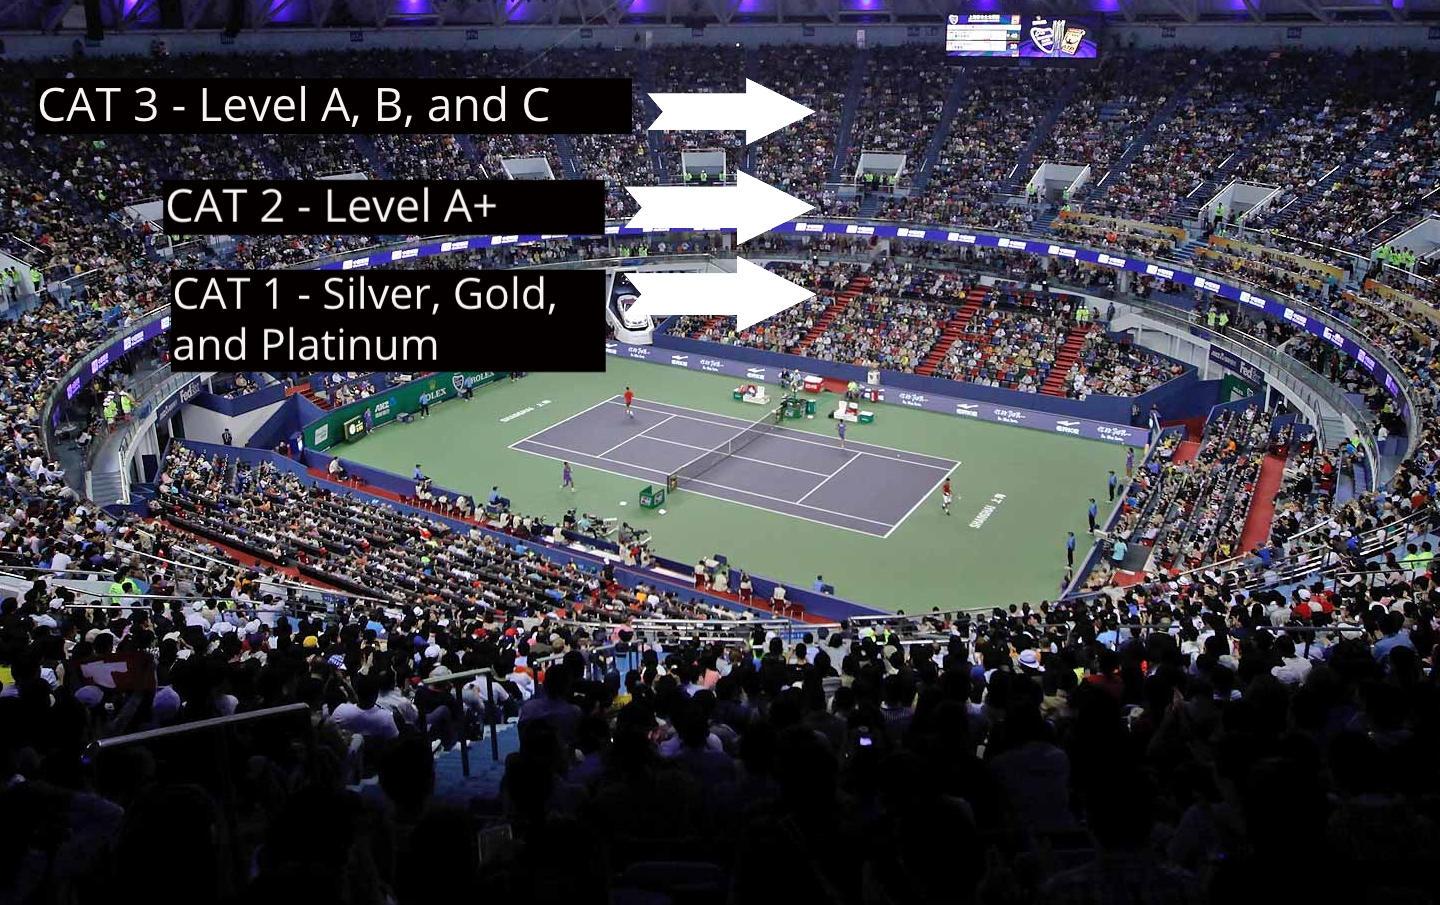 Rolex Shanghai Masters Seating levels